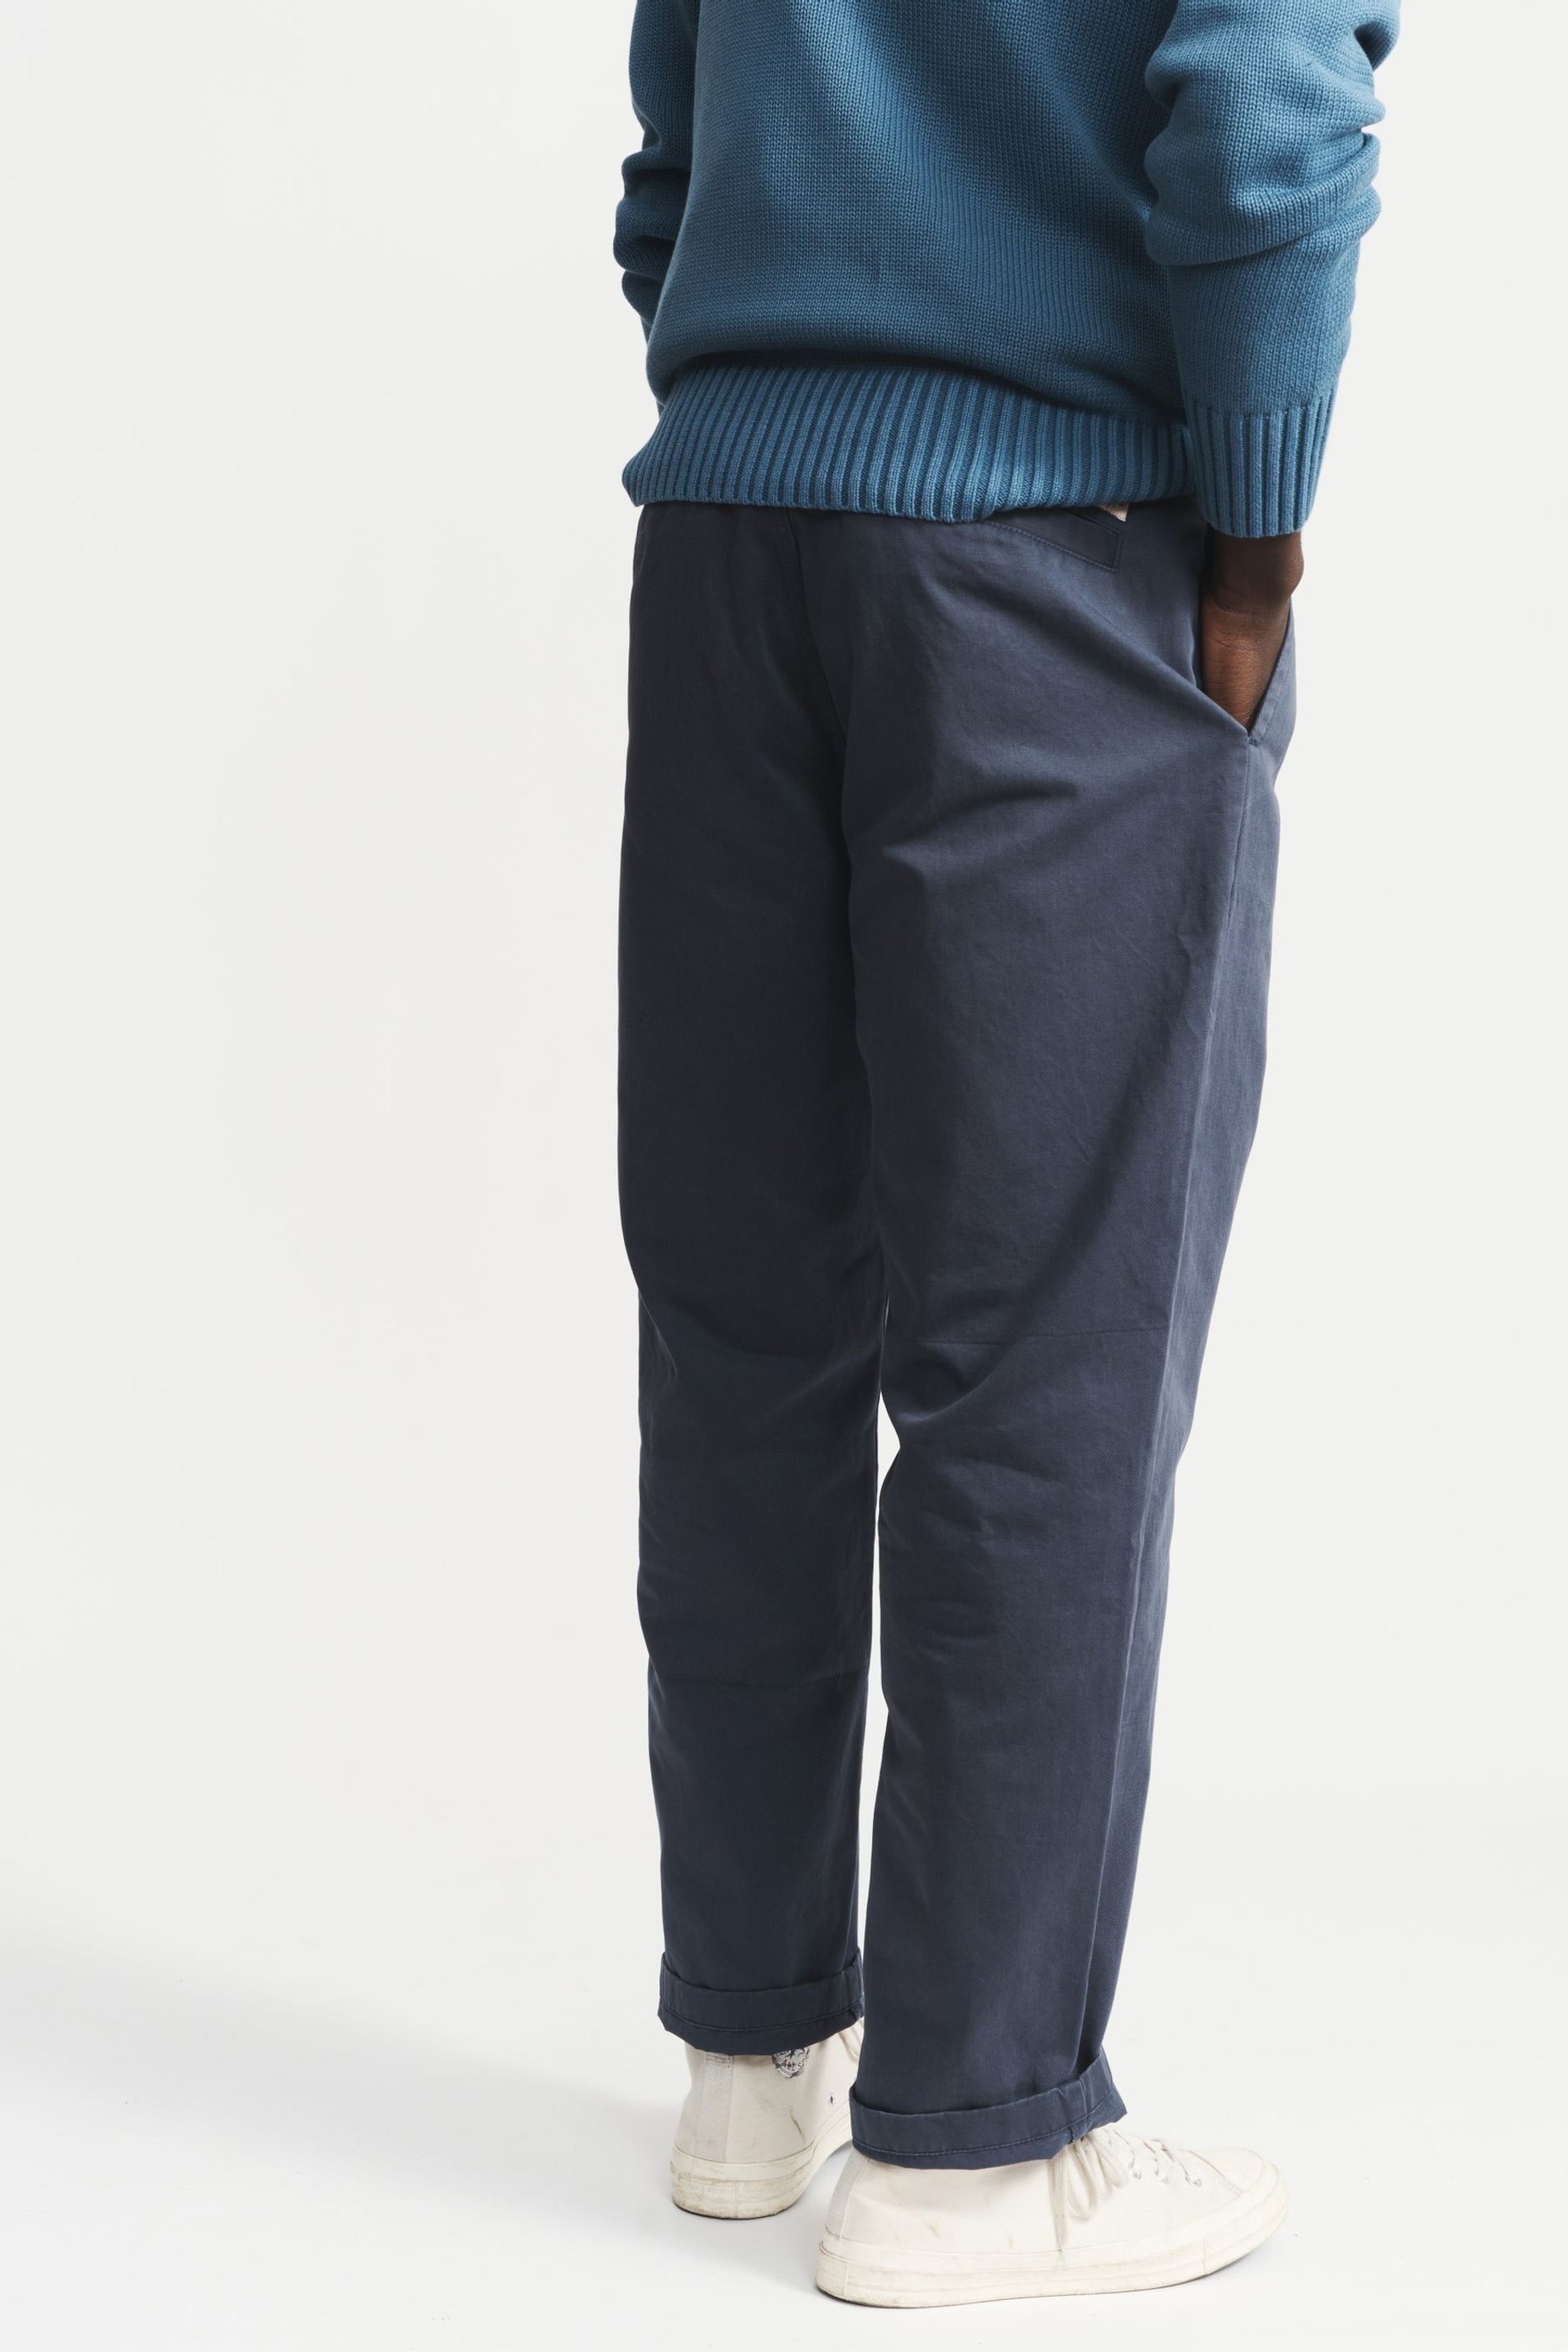 Aubin Barcombe Twill Trousers - Image 3 of 7